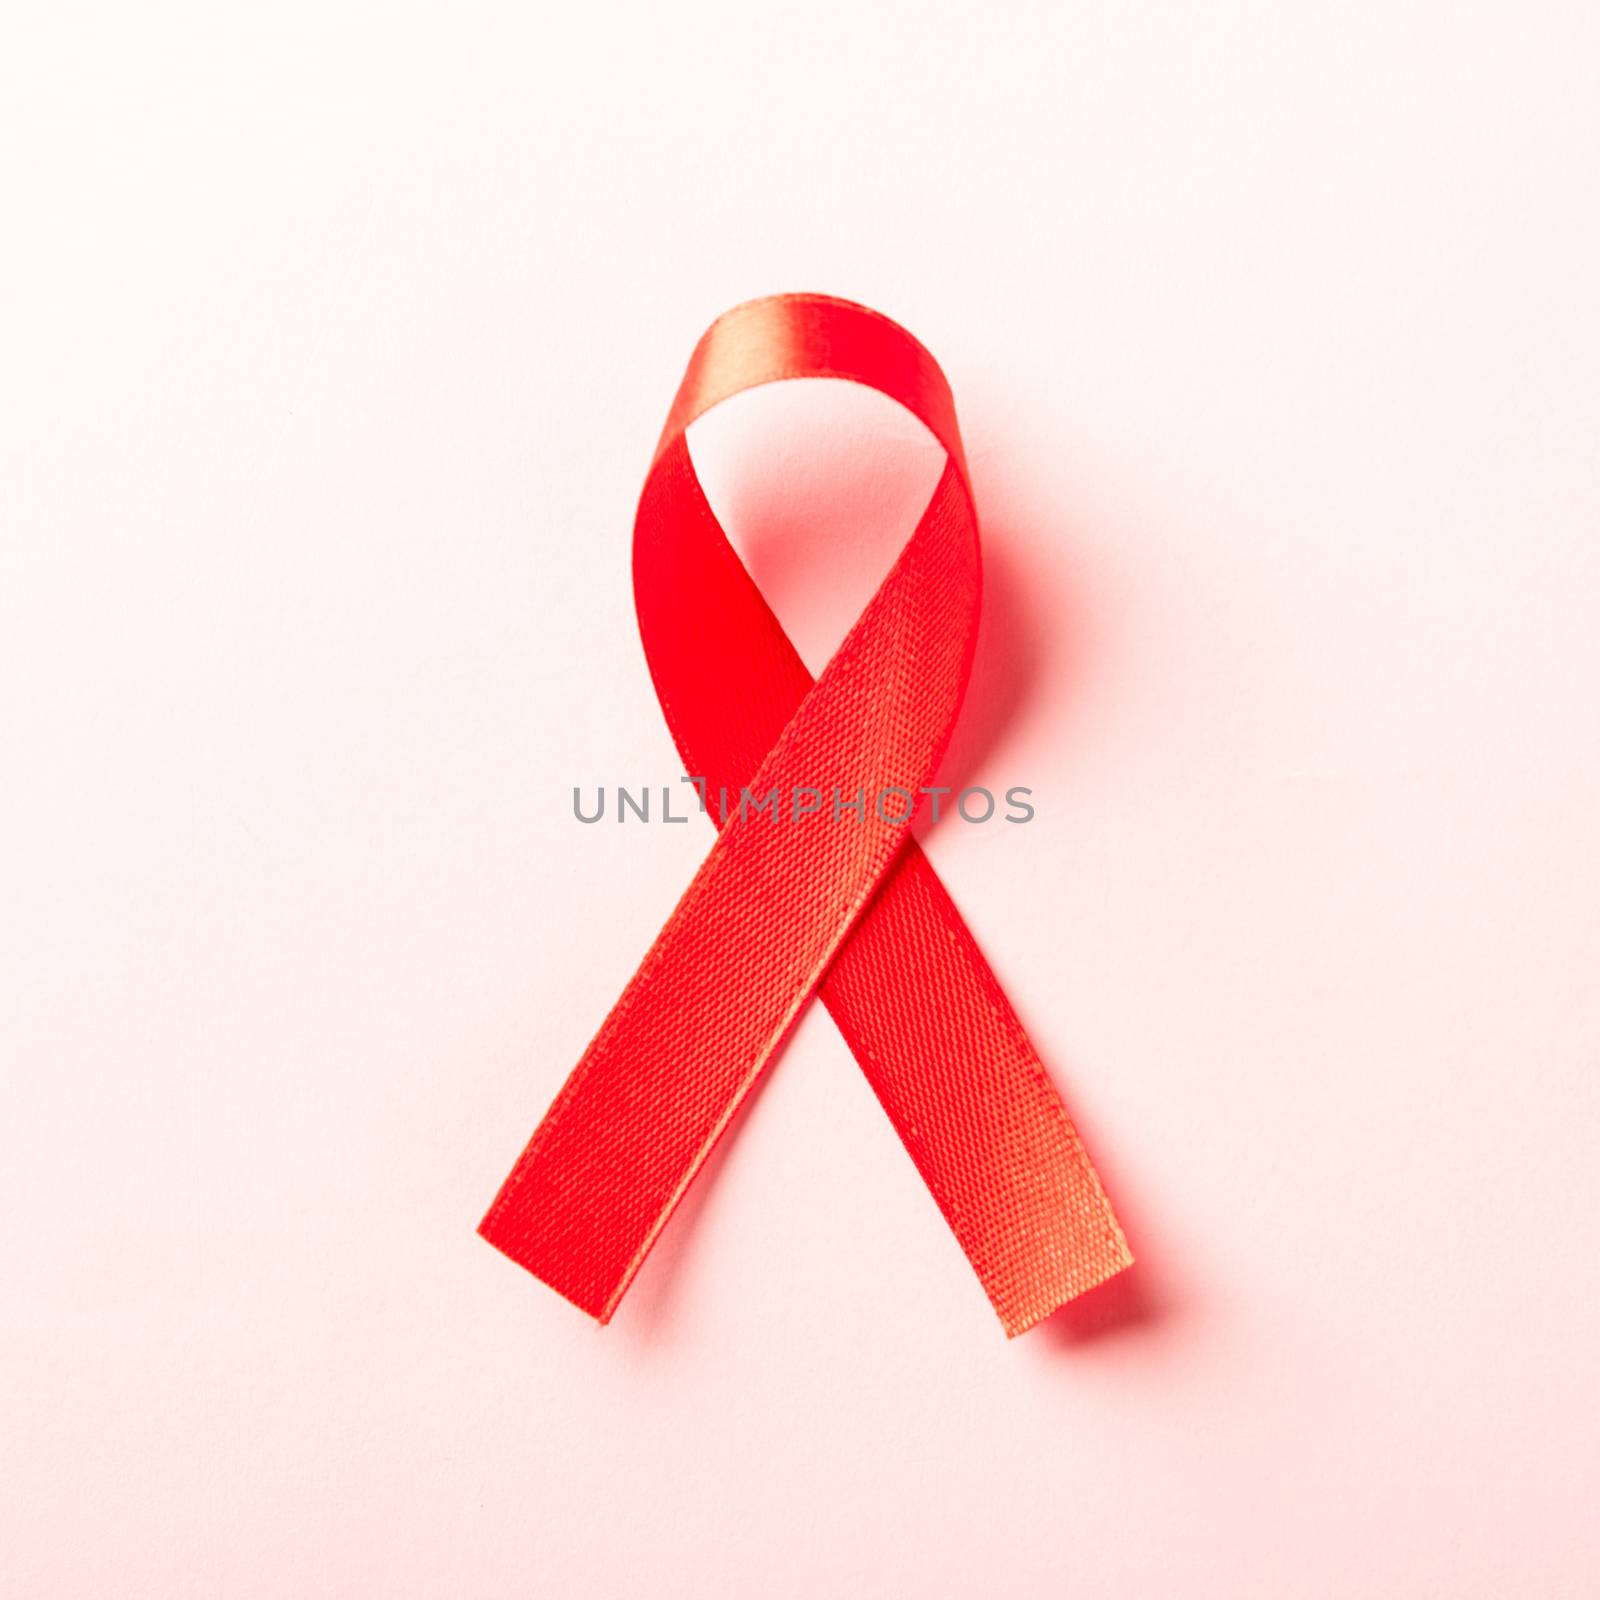 Red bow ribbon symbol HIV, AIDS cancer awareness with shadows, studio shot isolated on pink background, Healthcare medicine concept, World AIDS Day